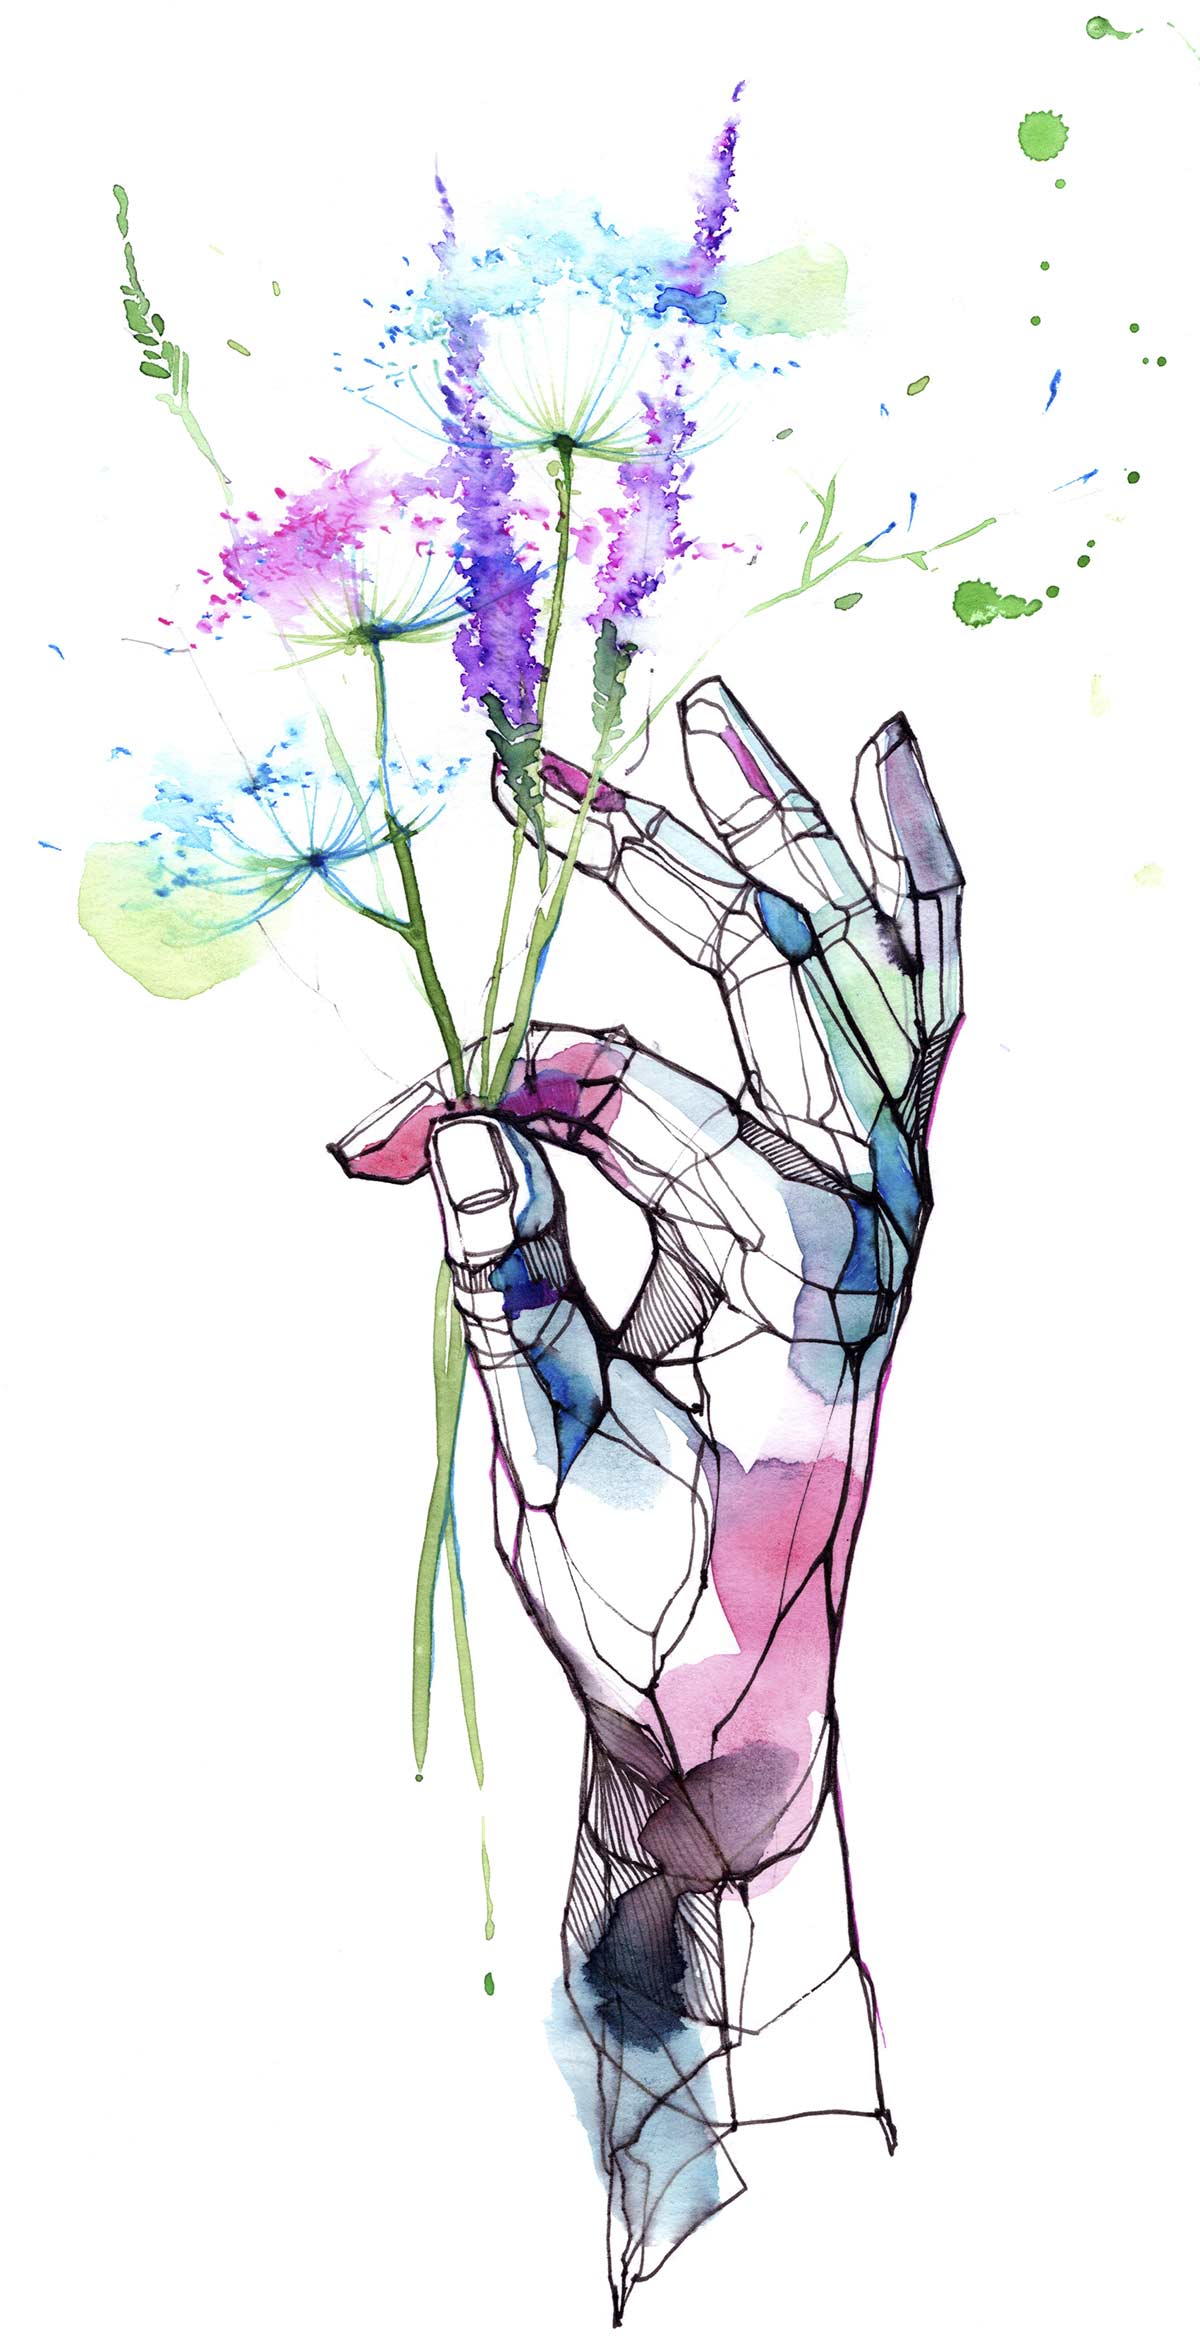 Ink and watercolor art peice of a hand holding flowers